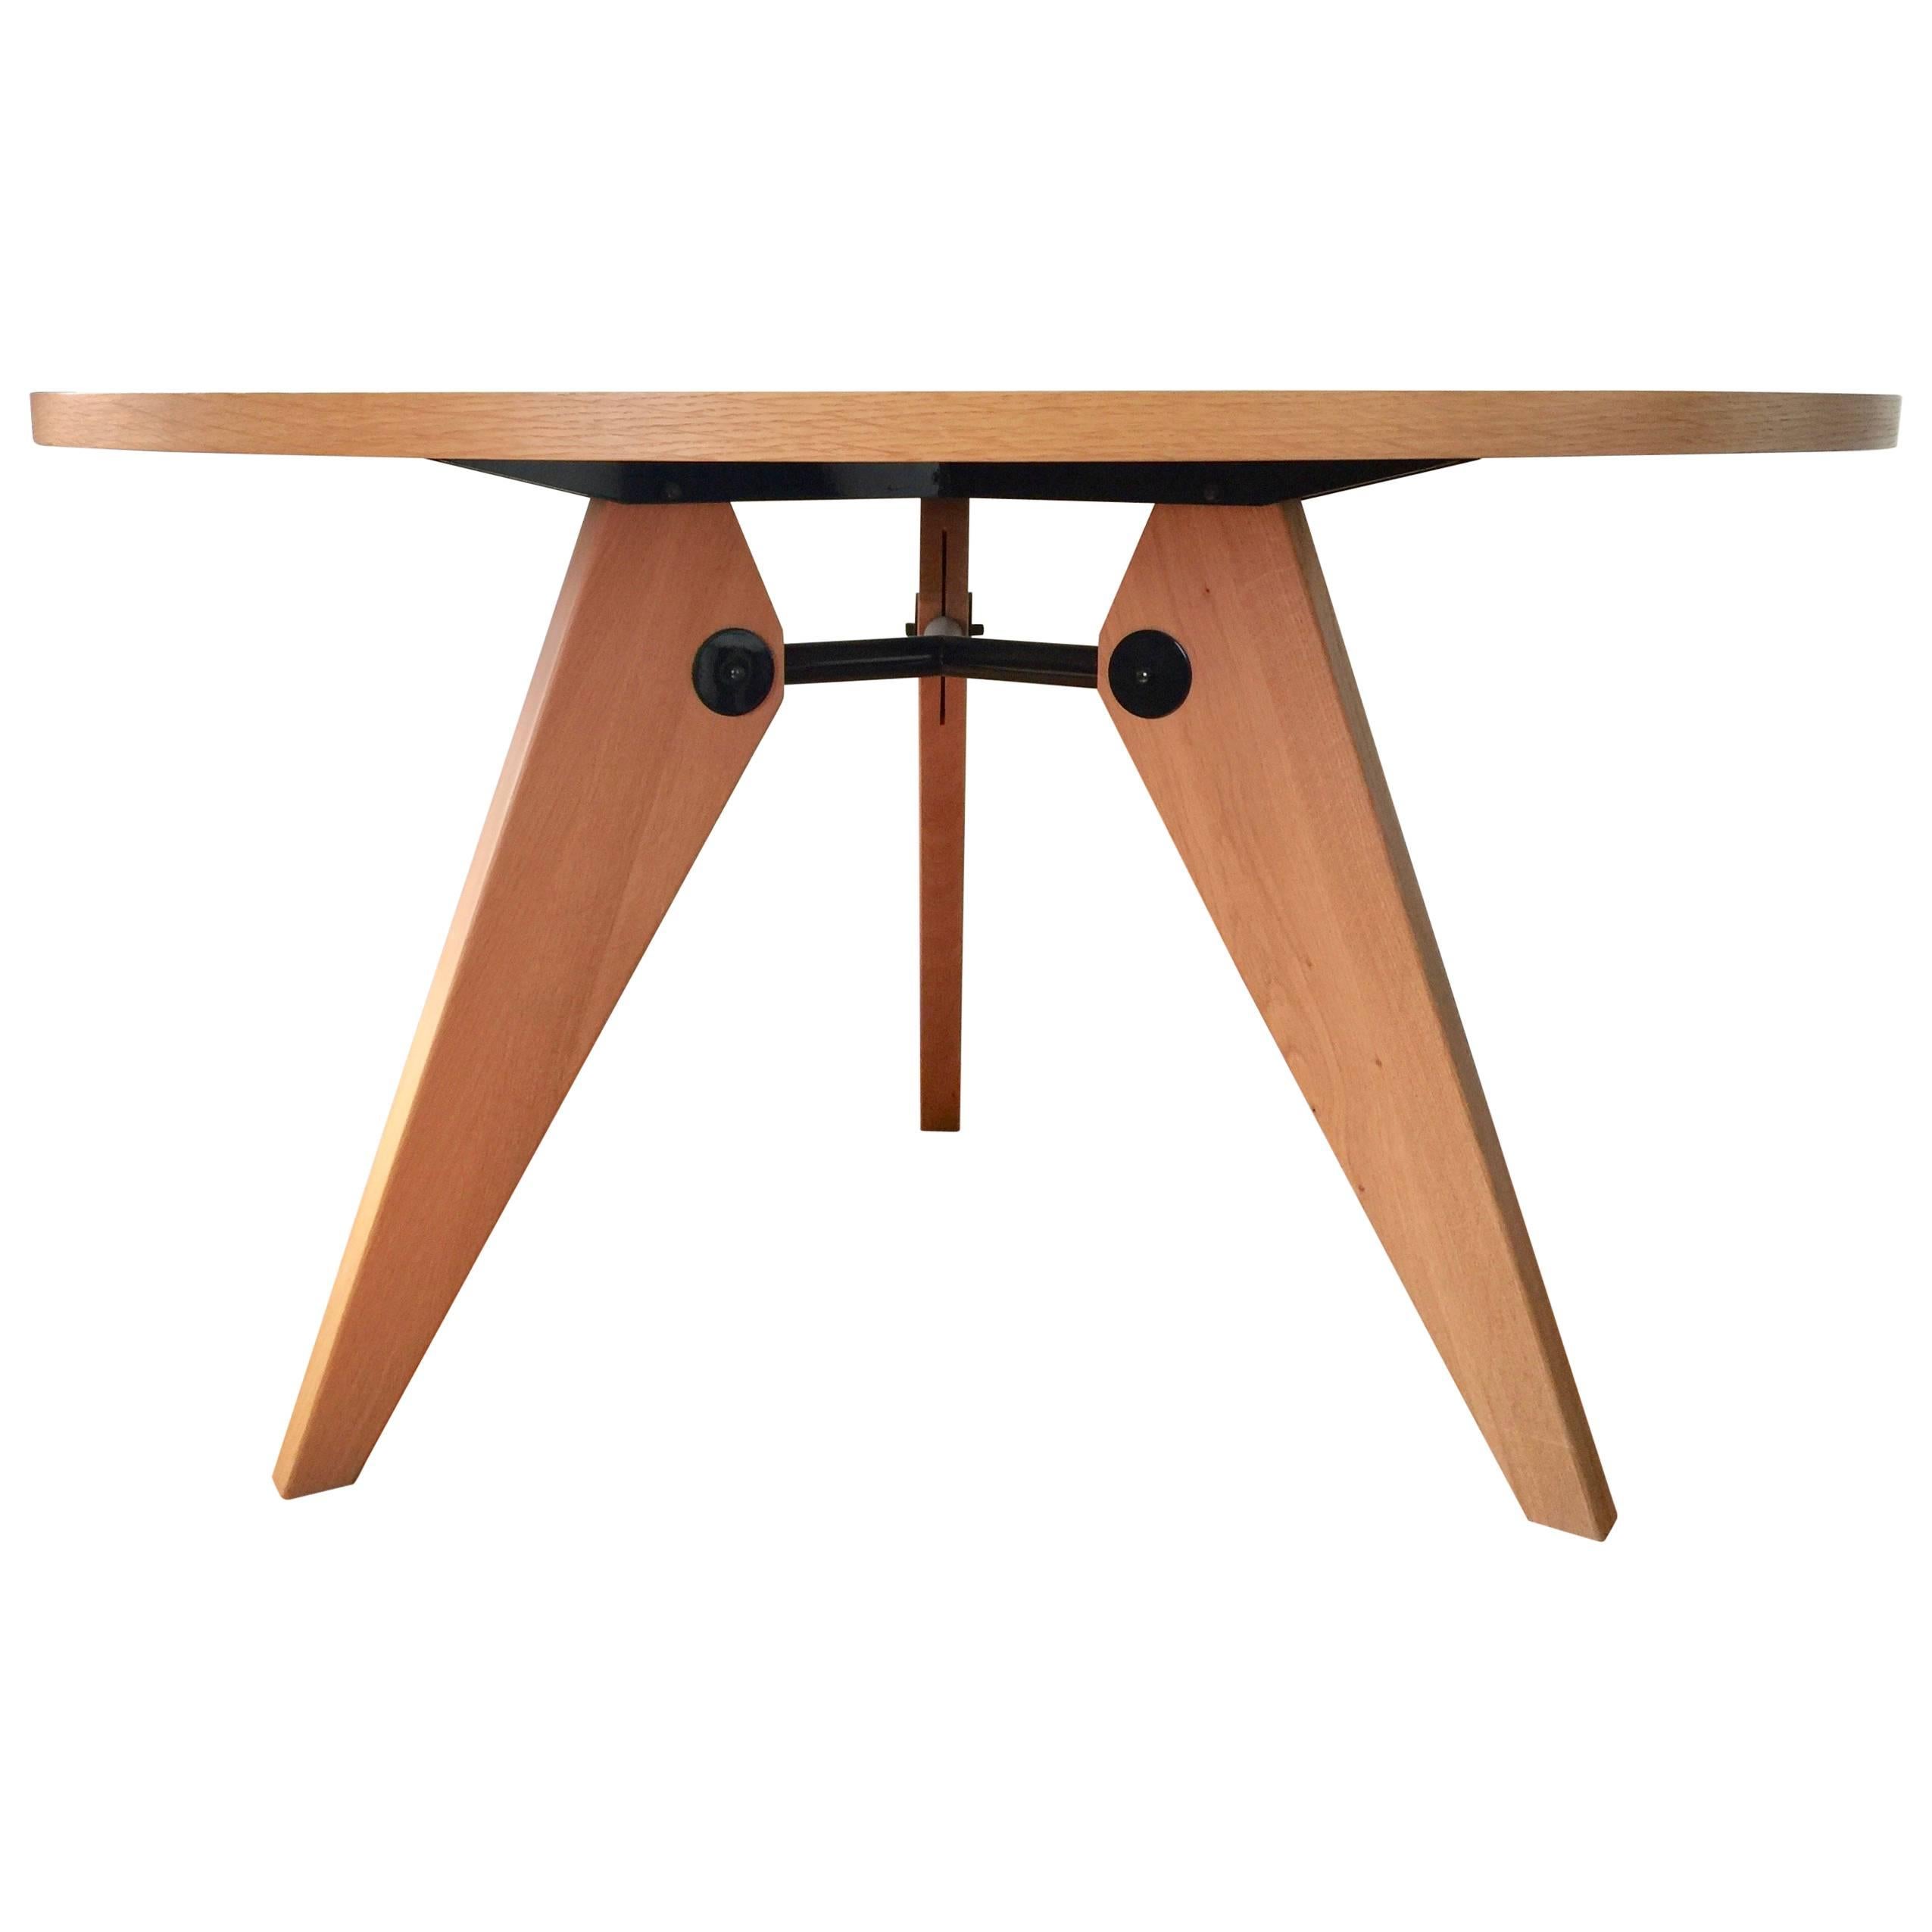 Vitra Dining Table Gueridon designed by Jean Prouve' wood and white top